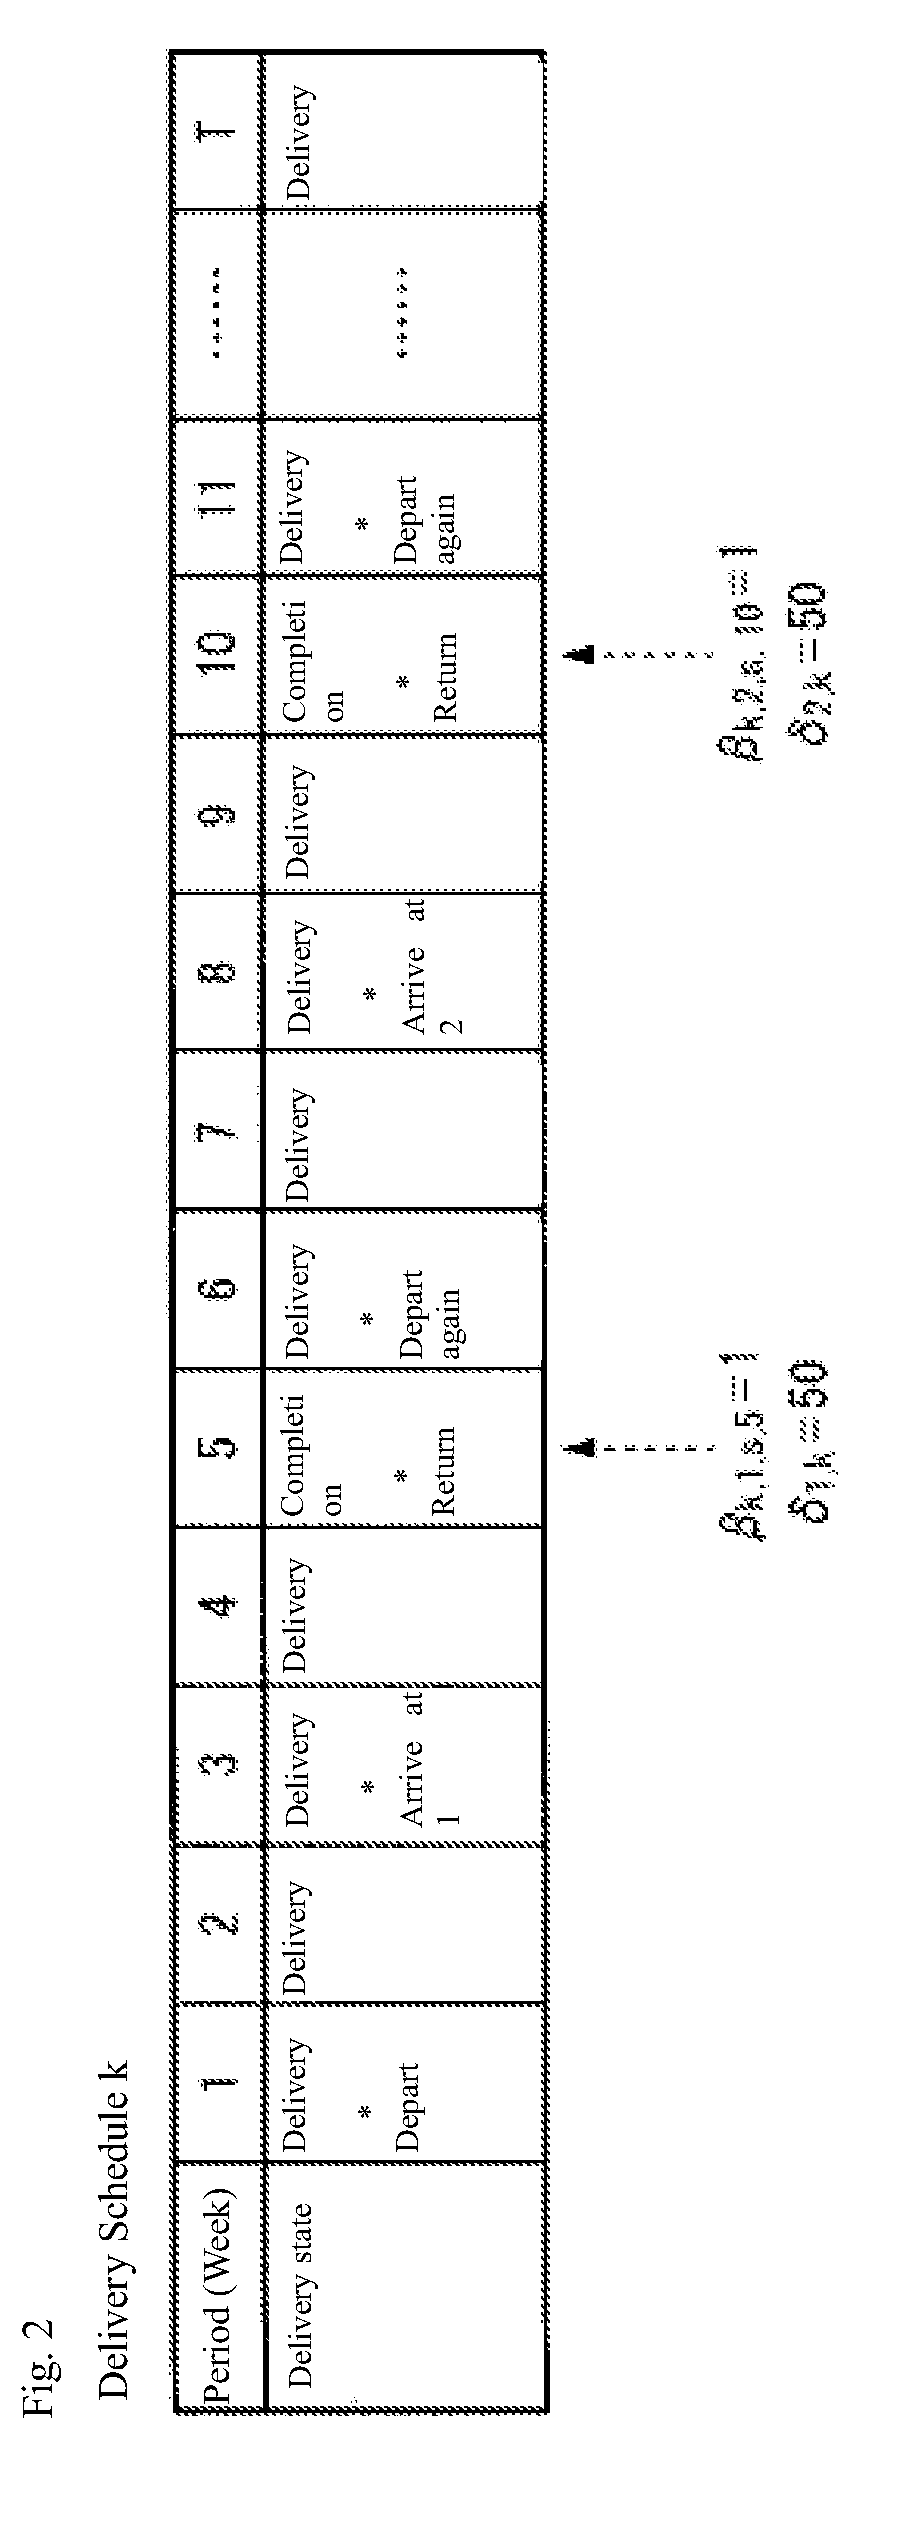 System and method for fuel procurement planning